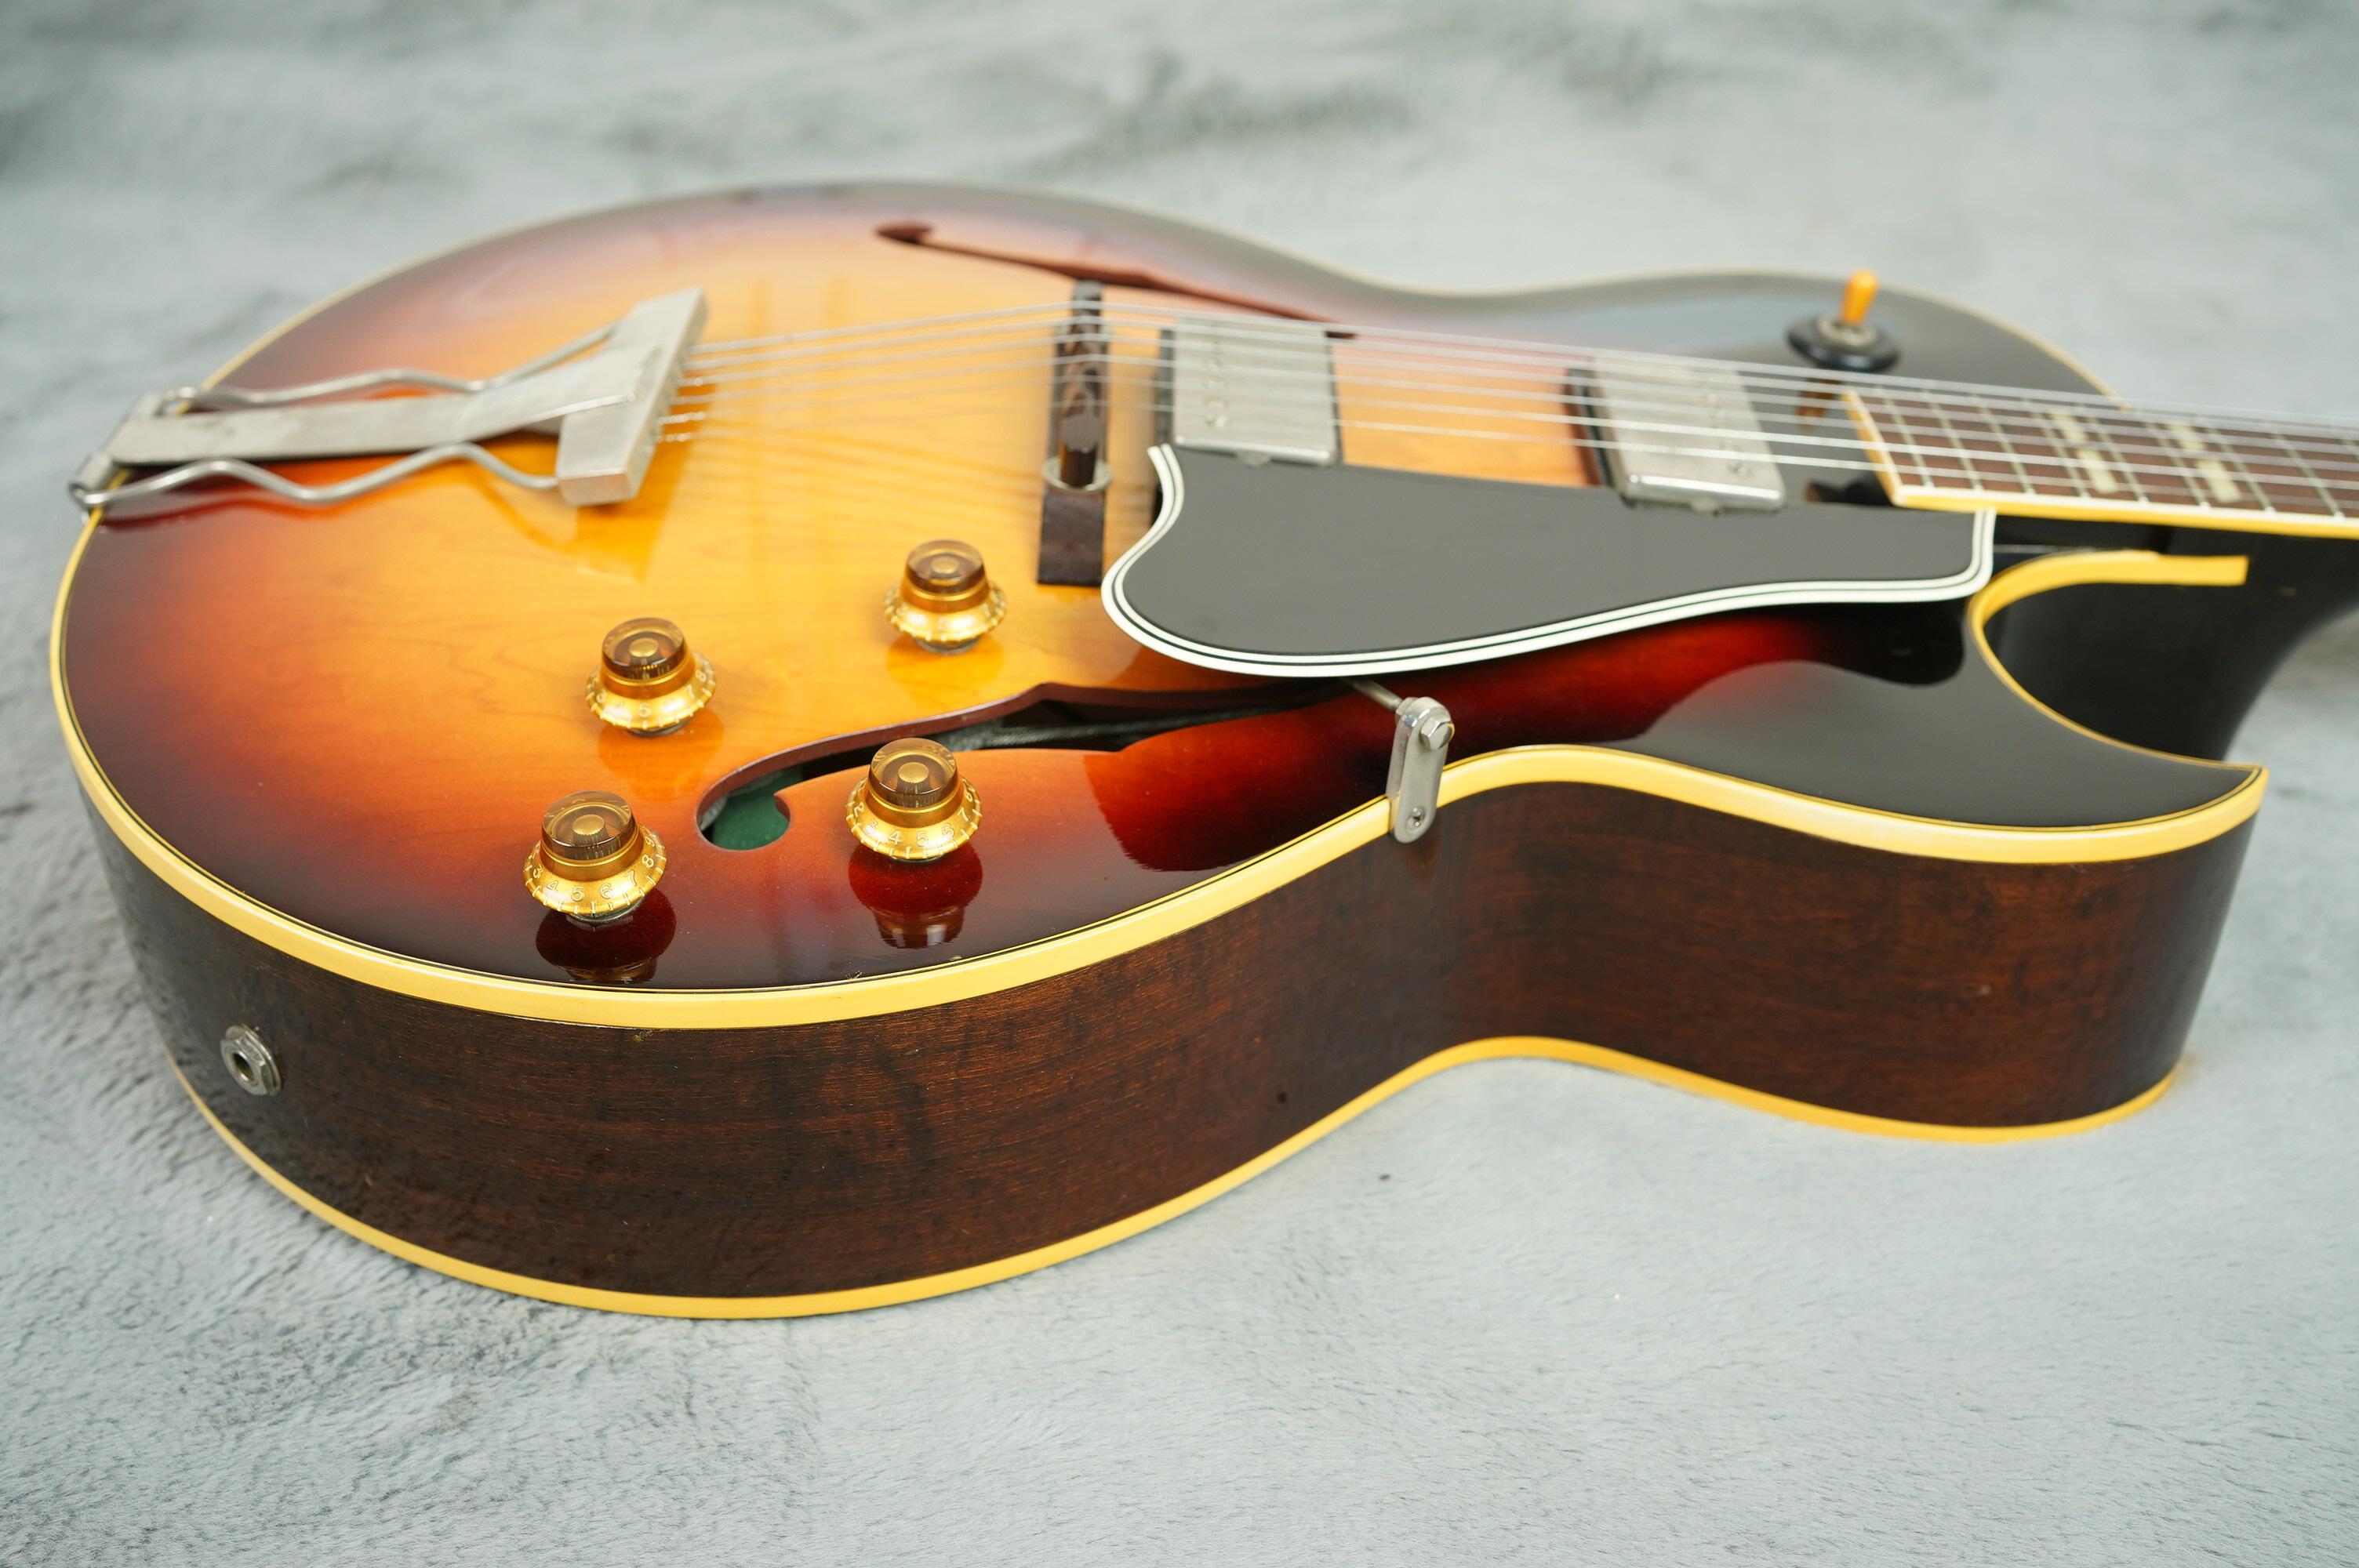 1959 Gibson ES-175D with Double White PAF's